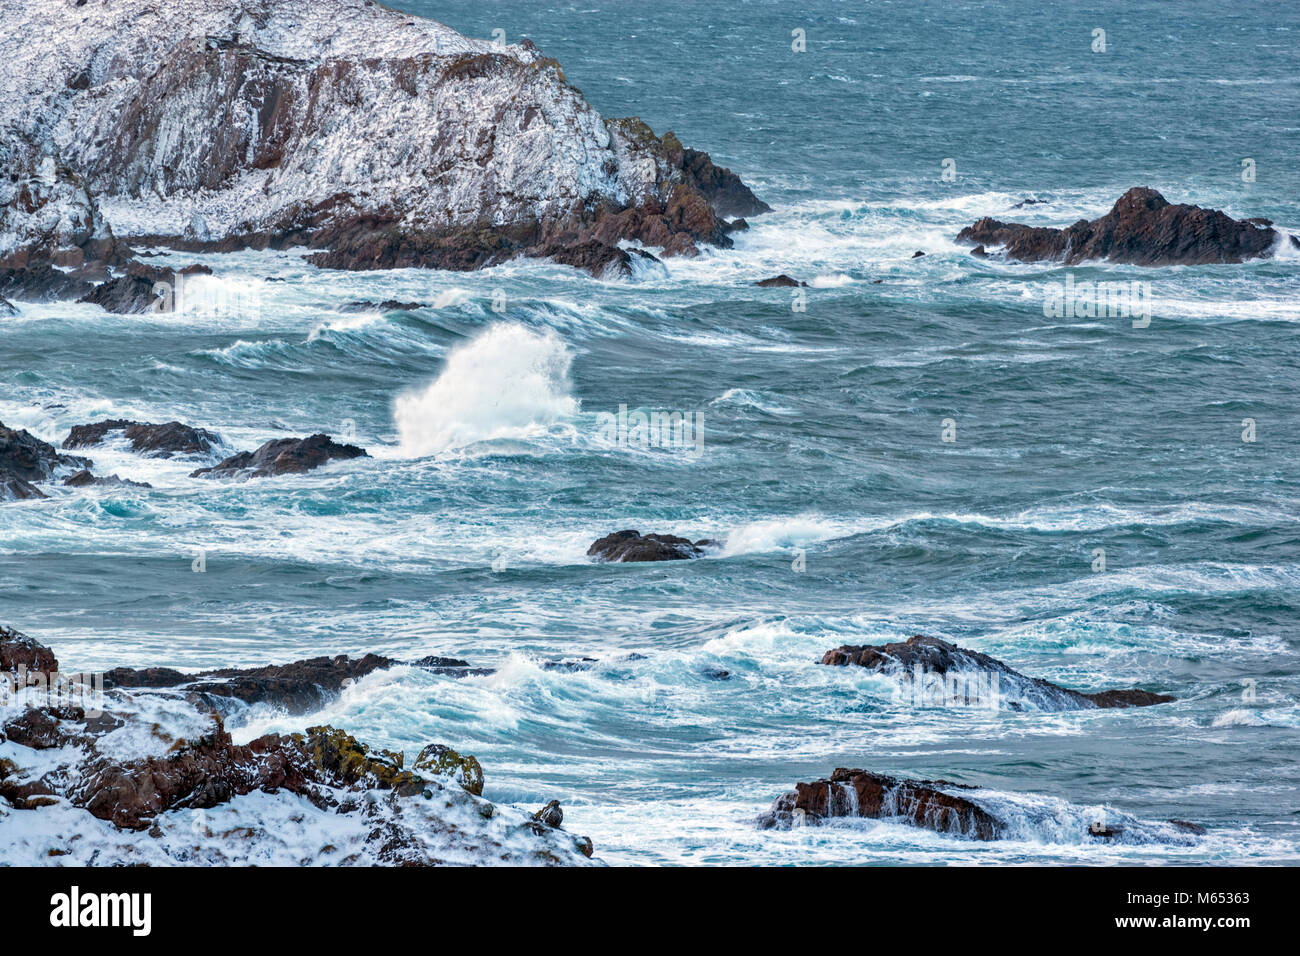 MORAY COAST SCOTLAND PORTKNOCKIE  IN FEBRUARY WINTER STORM WITH HIGH WINDS LARGE WAVES SPRAY AND SNOW Stock Photo